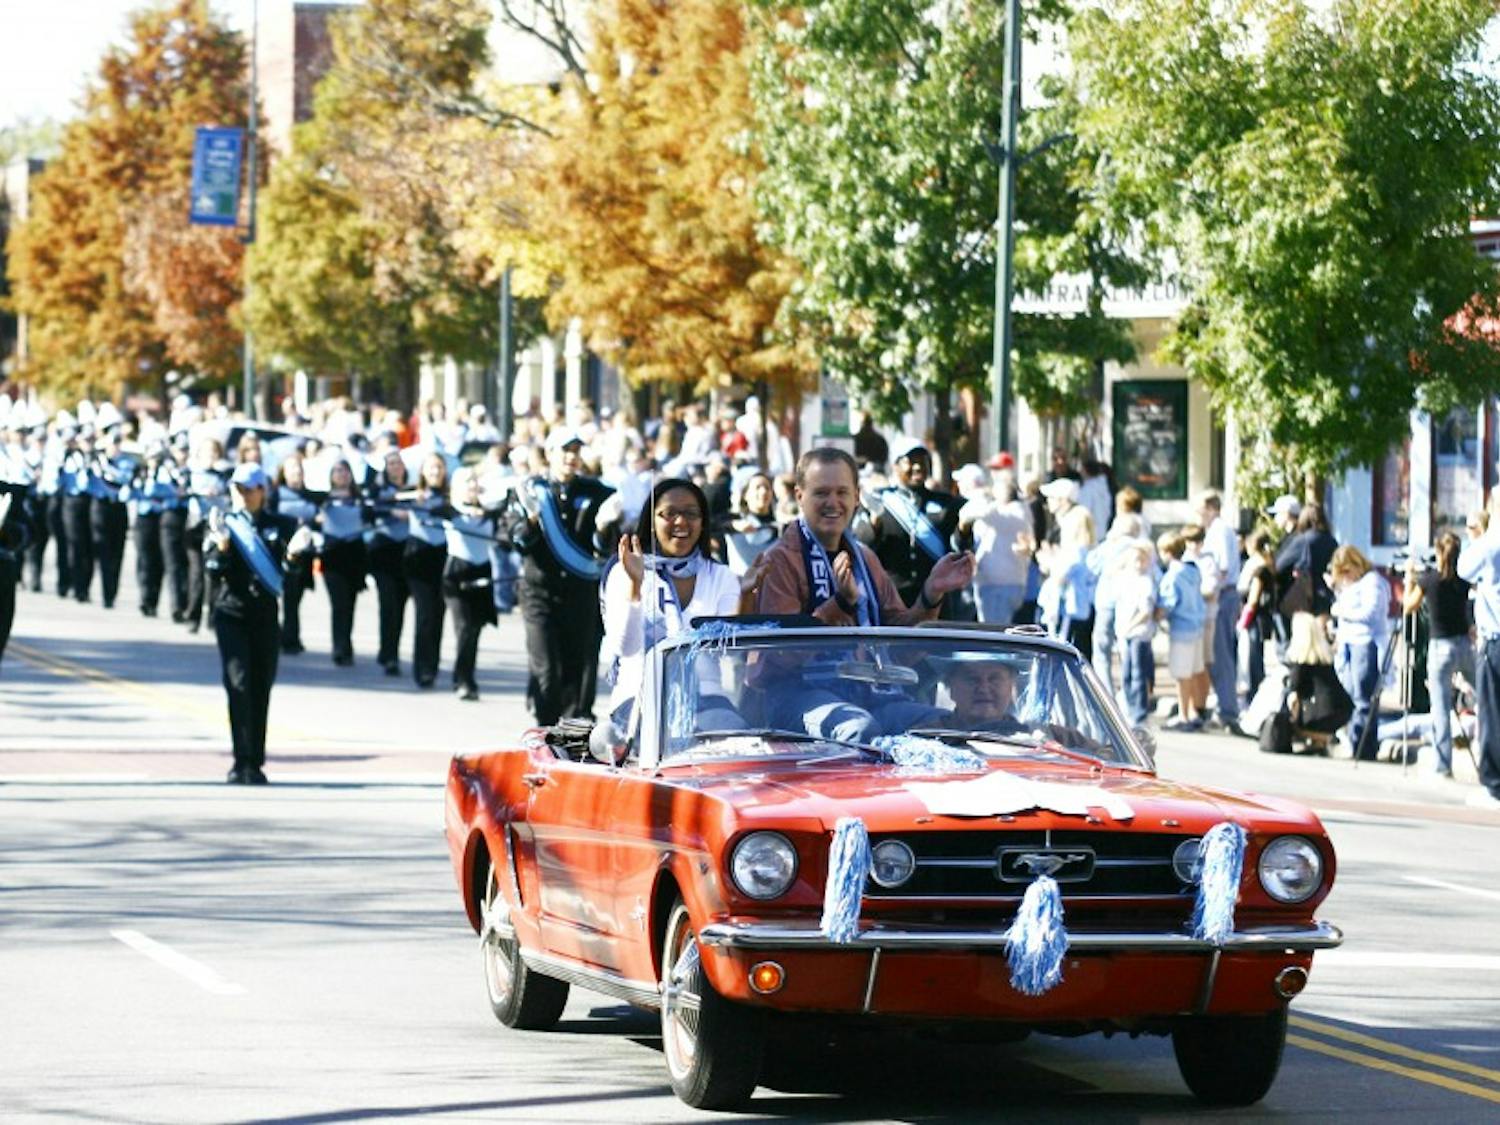 Student Body President Jasmin Jones rides in the parade that she helped organize, reviving a longstanding Homecoming tradition. Students and alumni gathered along Franklin St. Saturday morning for the first Homecoming parade since 1993. The parade started on S. Columbia and ended on Raleigh St.